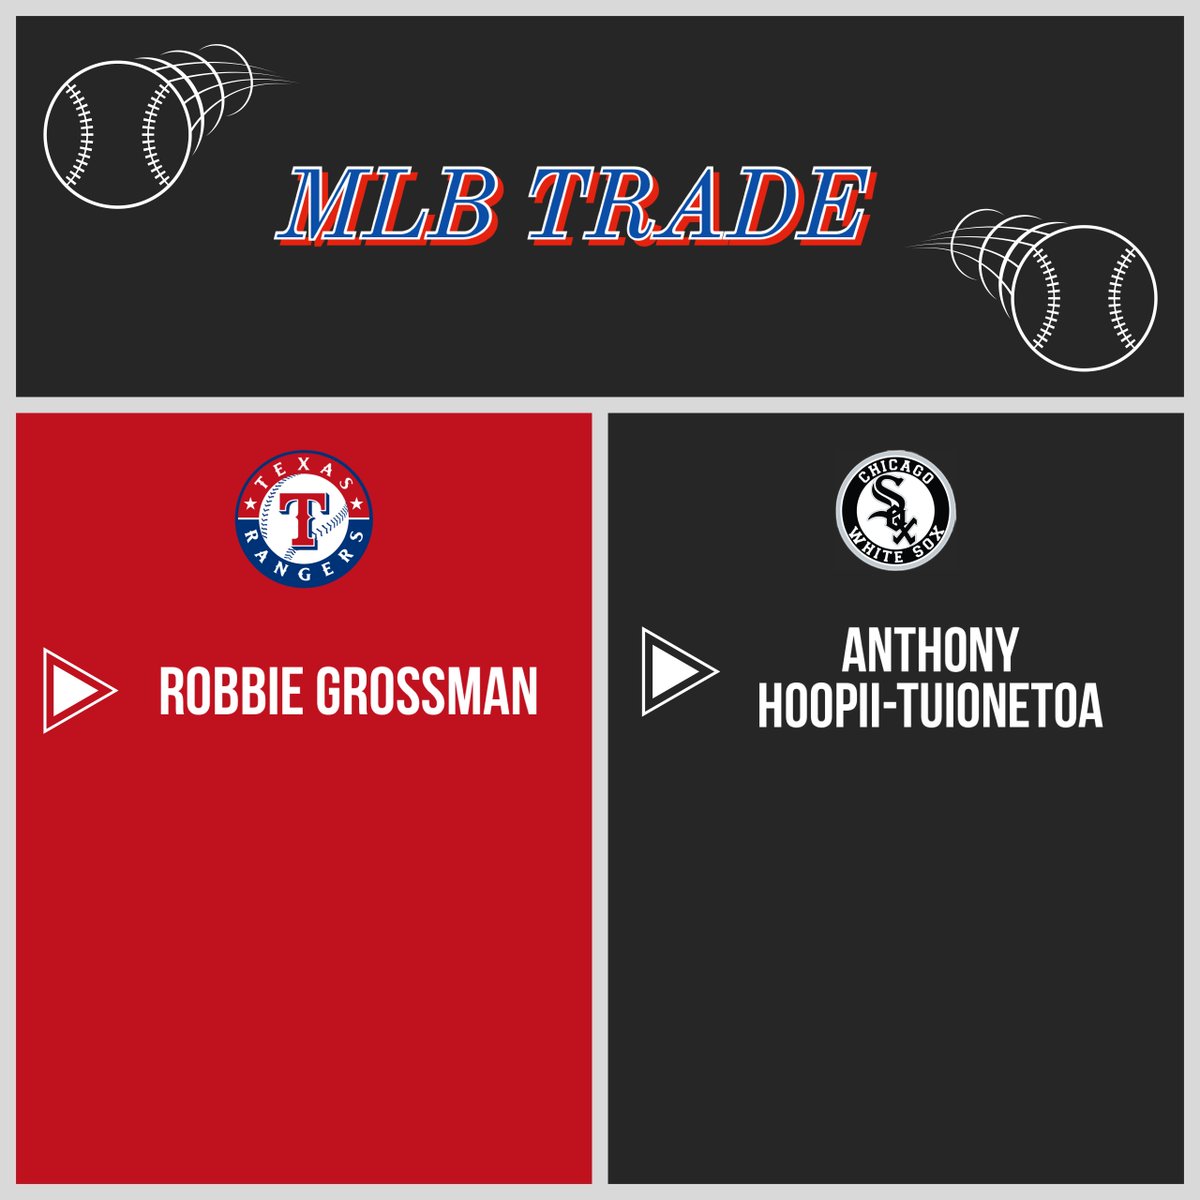 Earlier today, the Chicago White Sox traded outfielder Robbie Grossman to the Texas Rangers for minor league right-hand pitcher Anthony Hoopii-Tuionetoa. Grossman is excepted to return to a familiar role for the team. #chicagowhitesox #mlbtrade #robbiegrossman #texasranger 👀⚾🔁